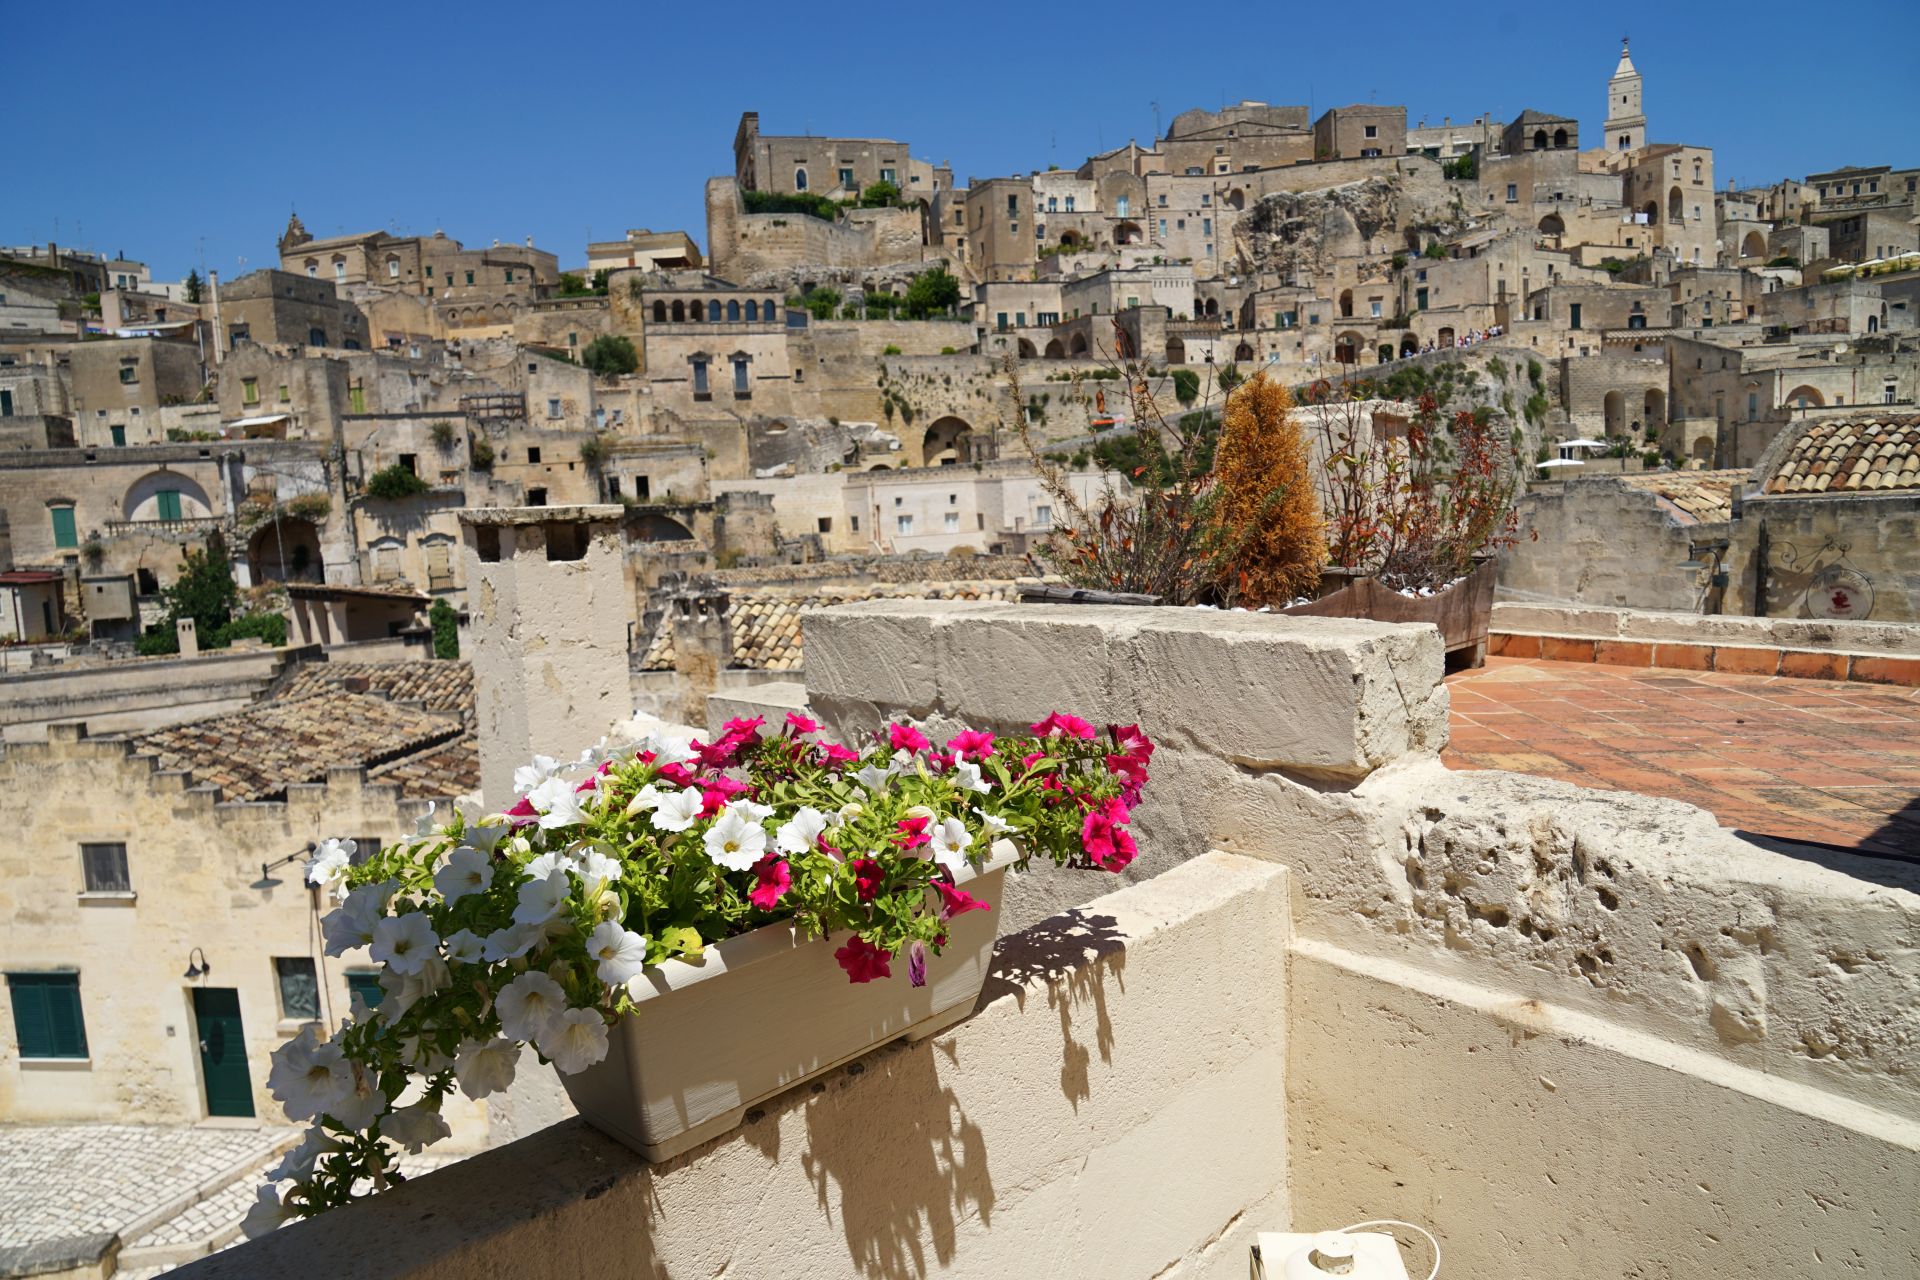 Sassi-di-Matera-historic-site-balcony-with-flowers-view-popular-tourist-travel-place-summer-holiday-concept-Basilicata-Italy